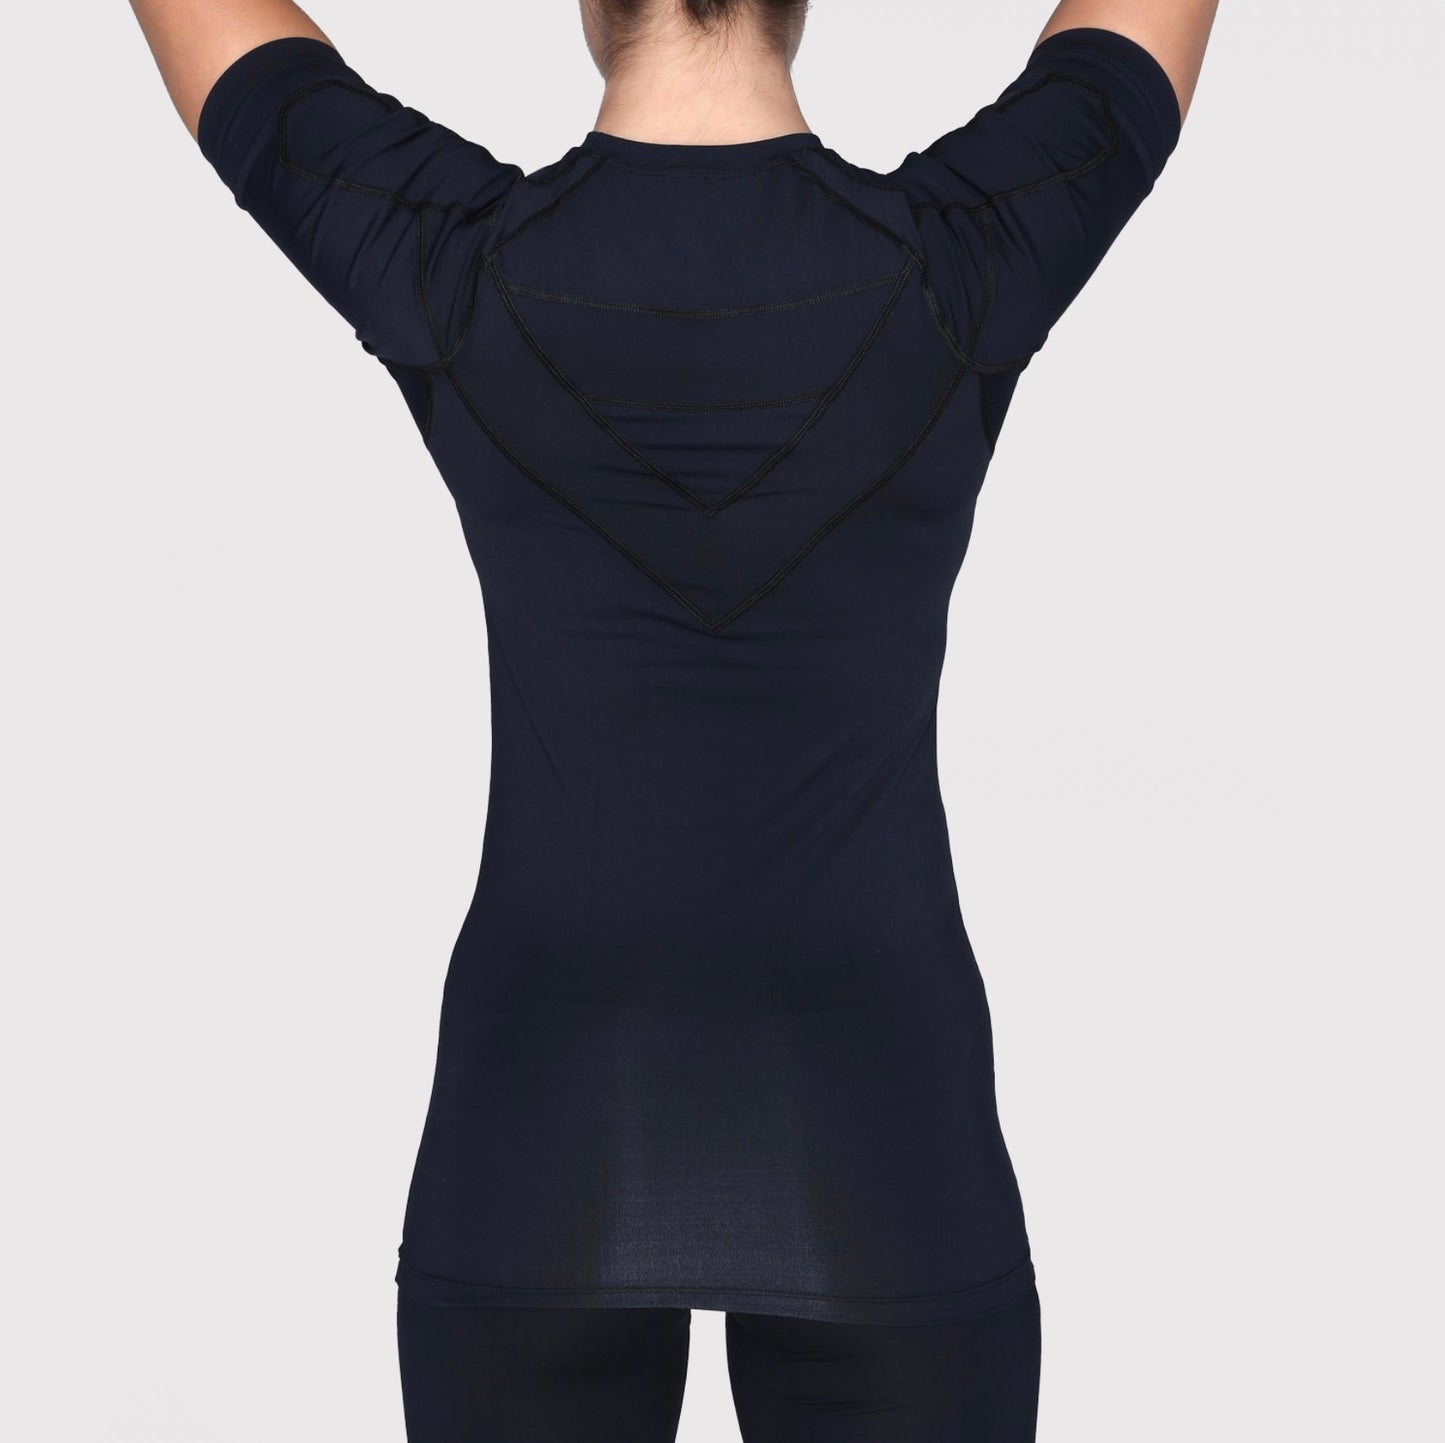 Dynamic Ladies' Sublimated SS Compression Shirt